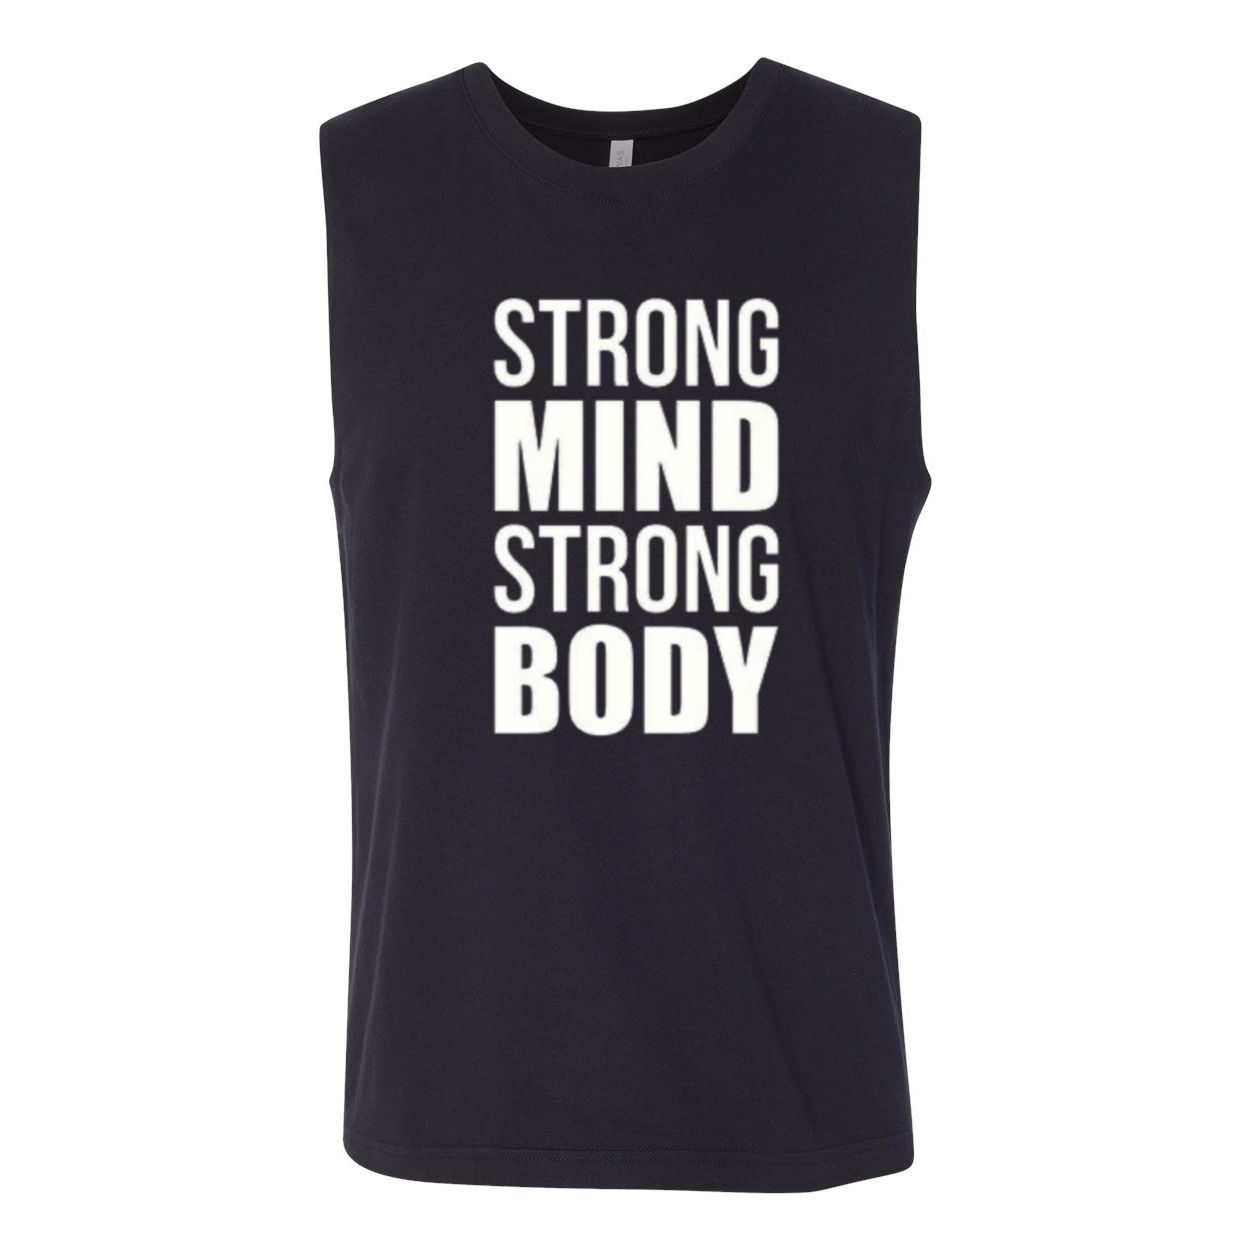 YOLO FITTED STRONG MIND STRONG BODY MEN'S  MUSCLE TANK - Yolofitted